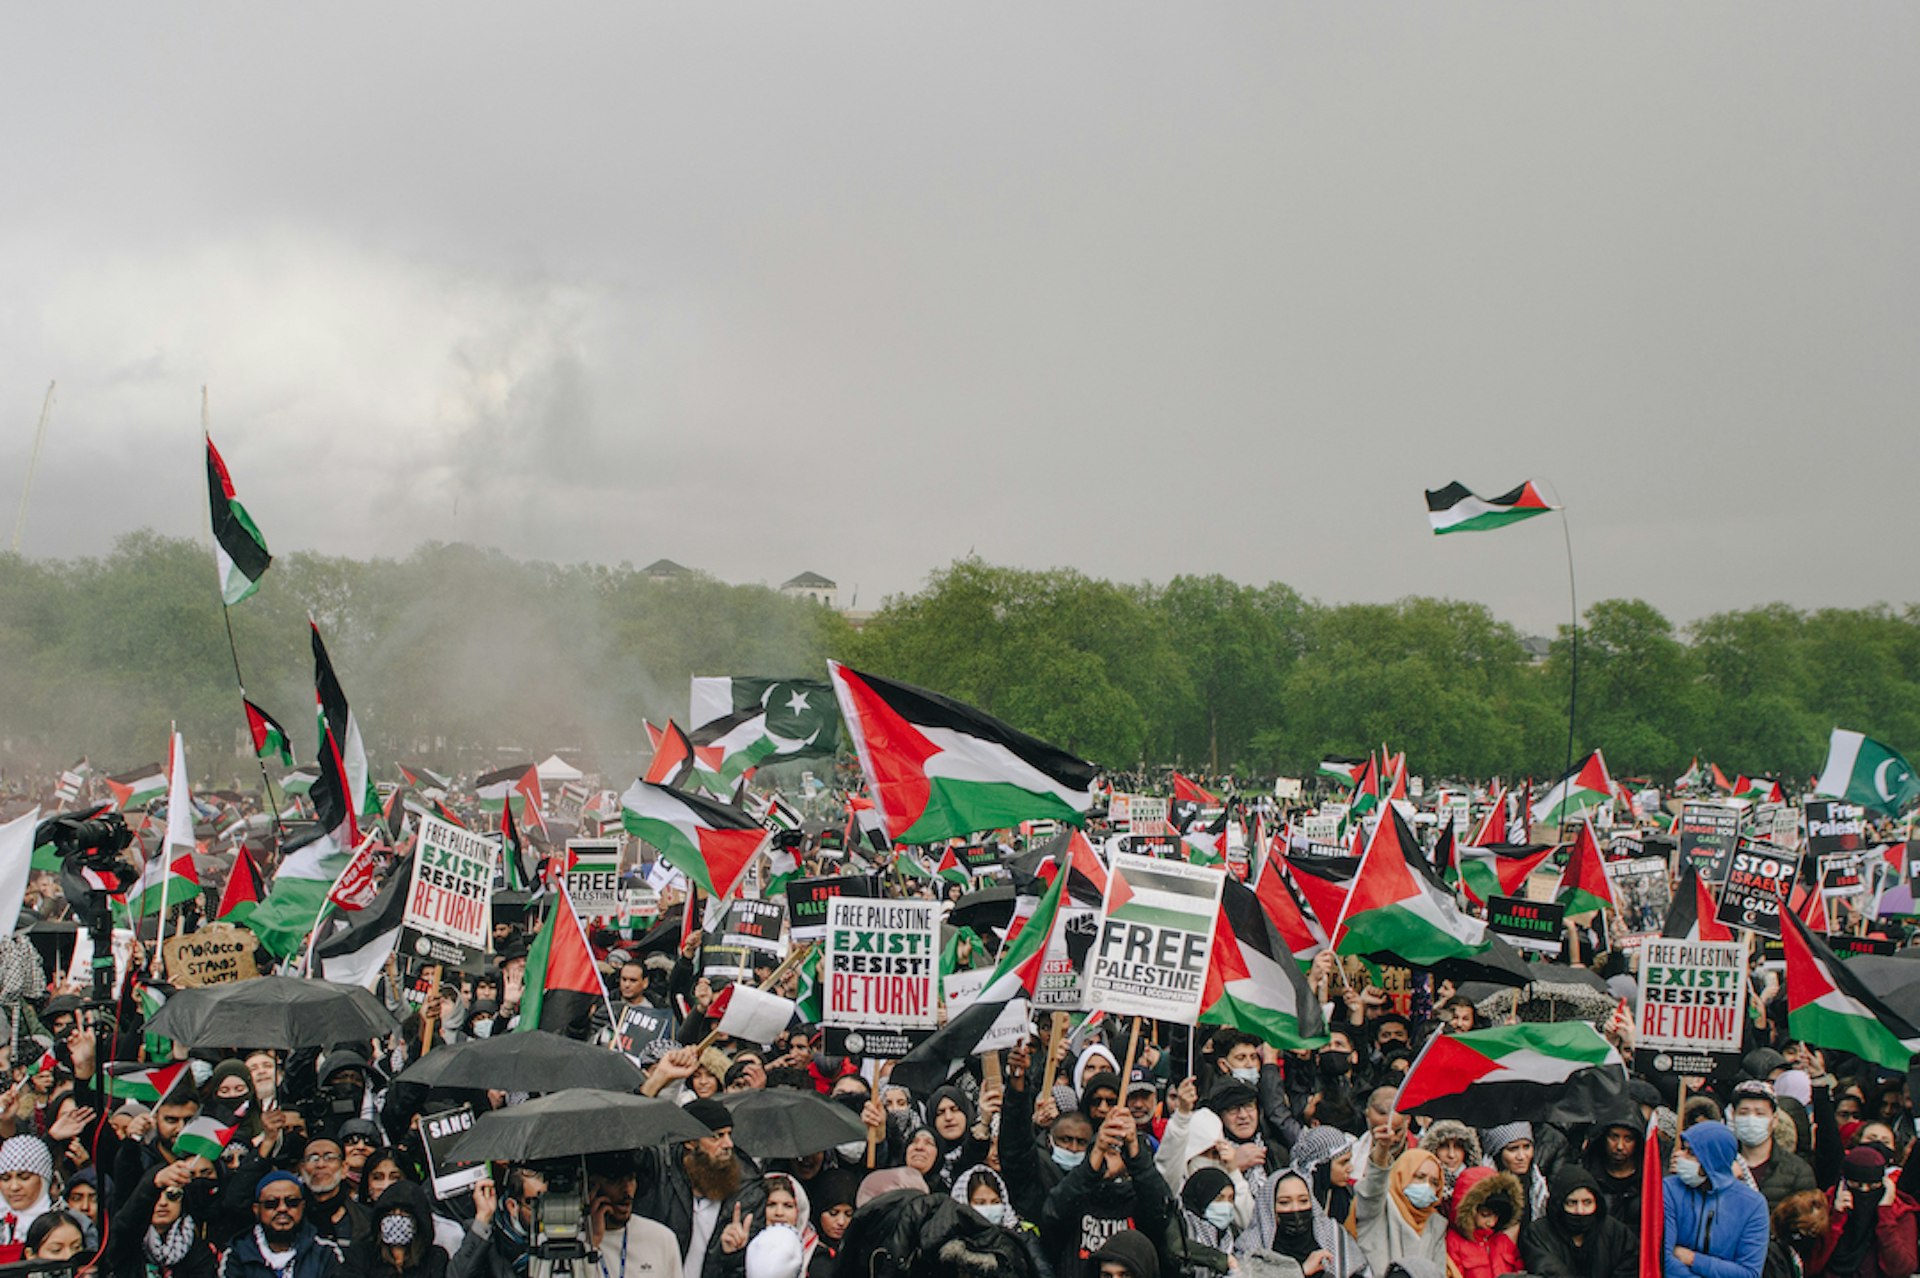 Photos from Britain’s largest Palestine demo in history